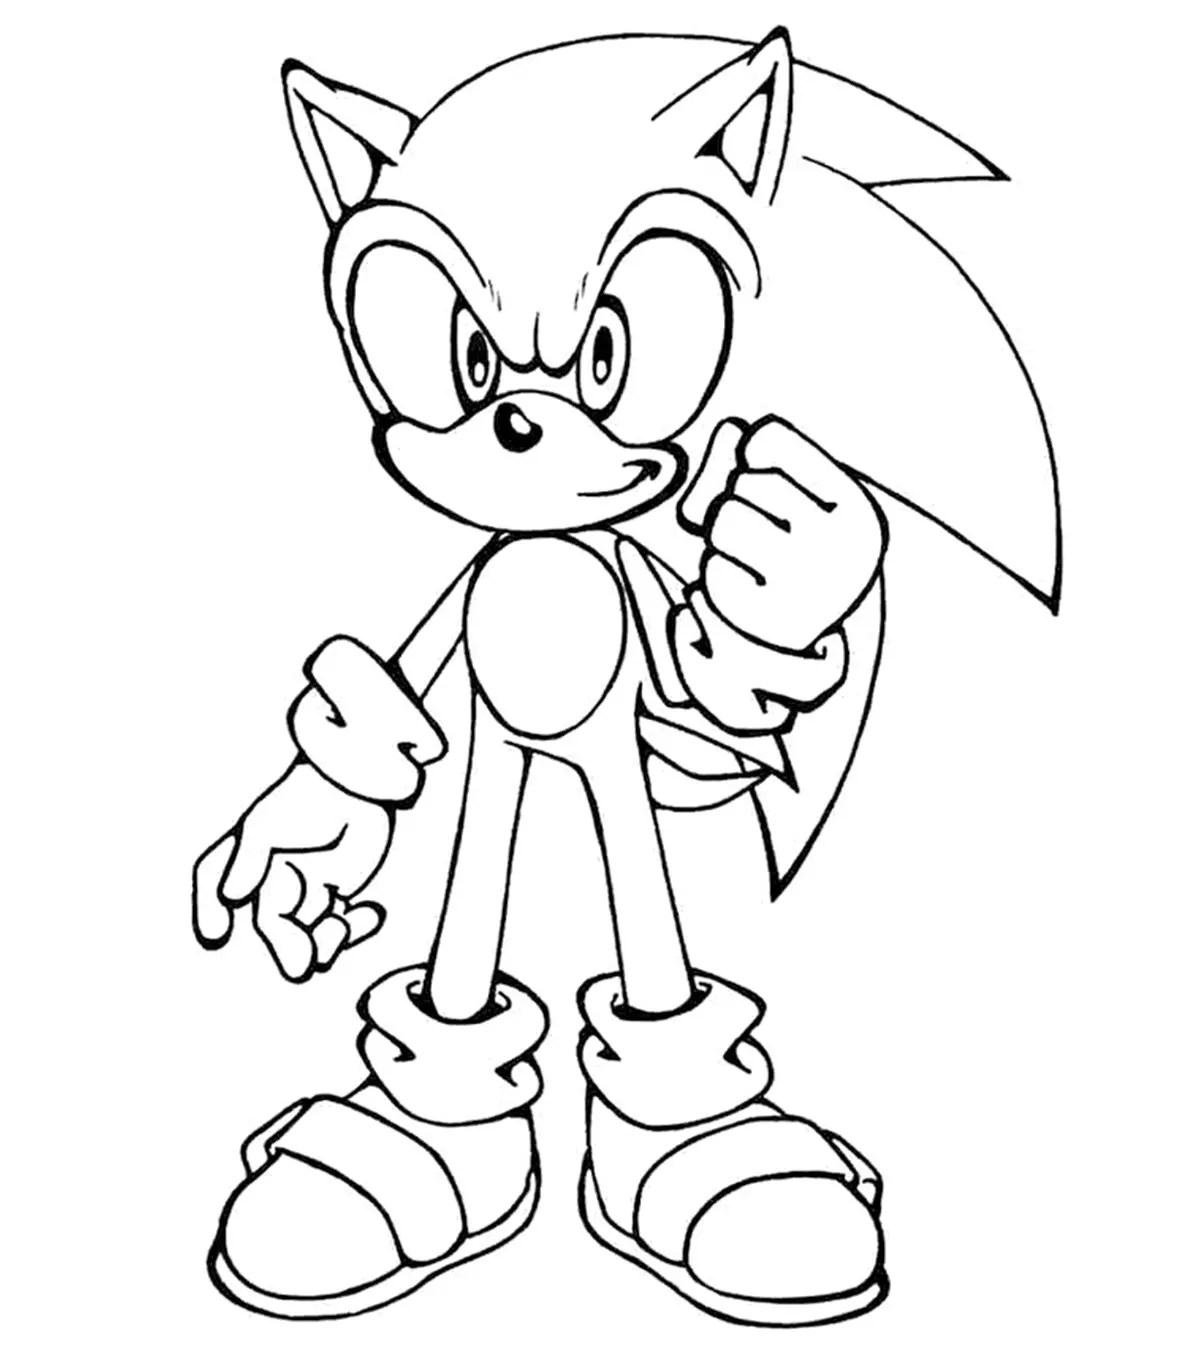 Top 21 Sonic The Hedgehog Coloring Pages For Your Little Ones